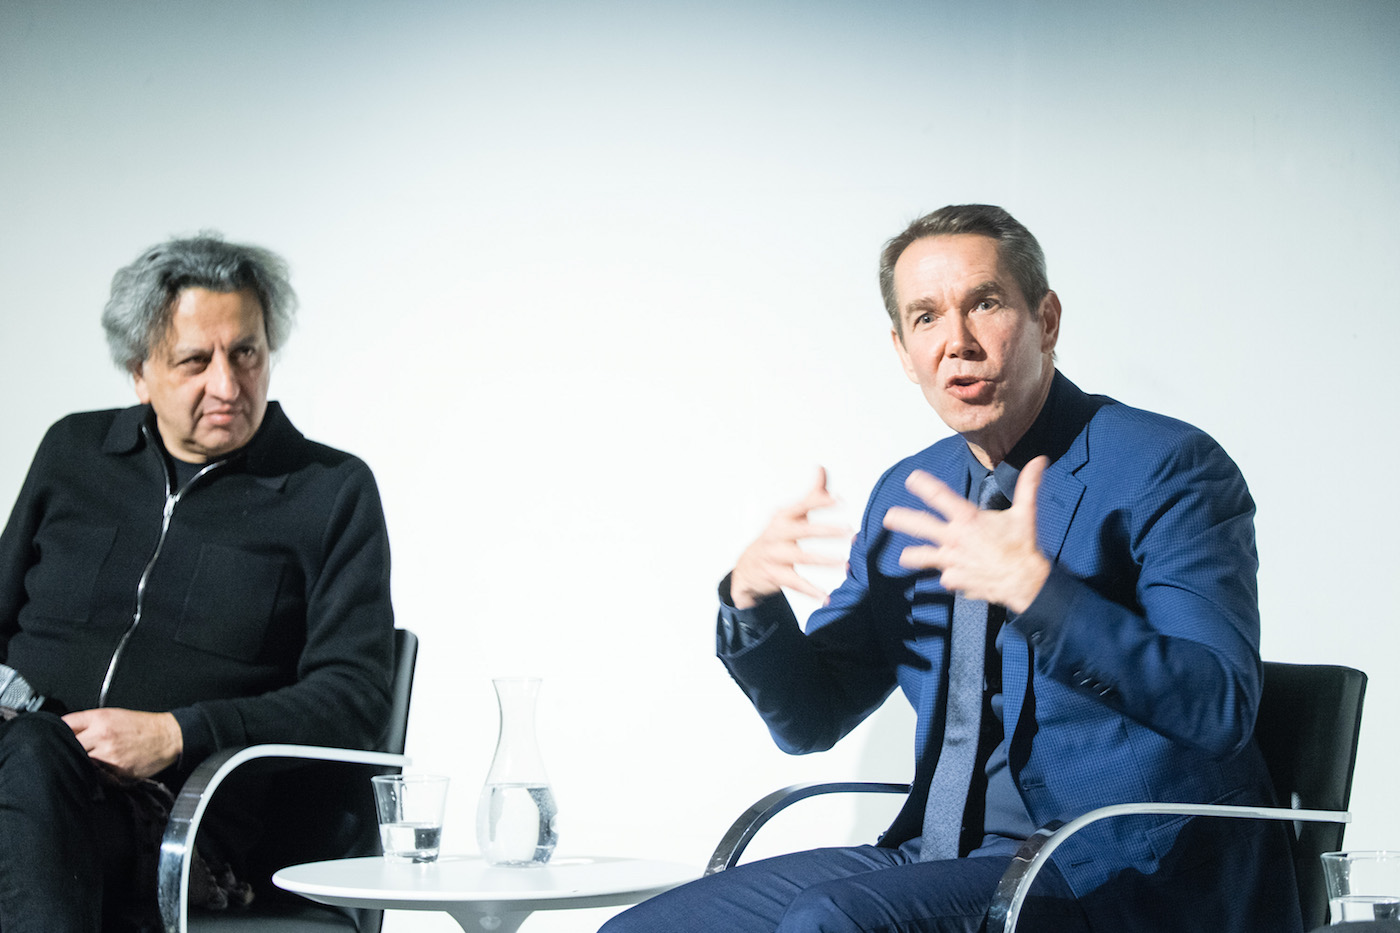 Artist Jeff Koons speaks at the GSD, Tuesday, February 7, 2017.